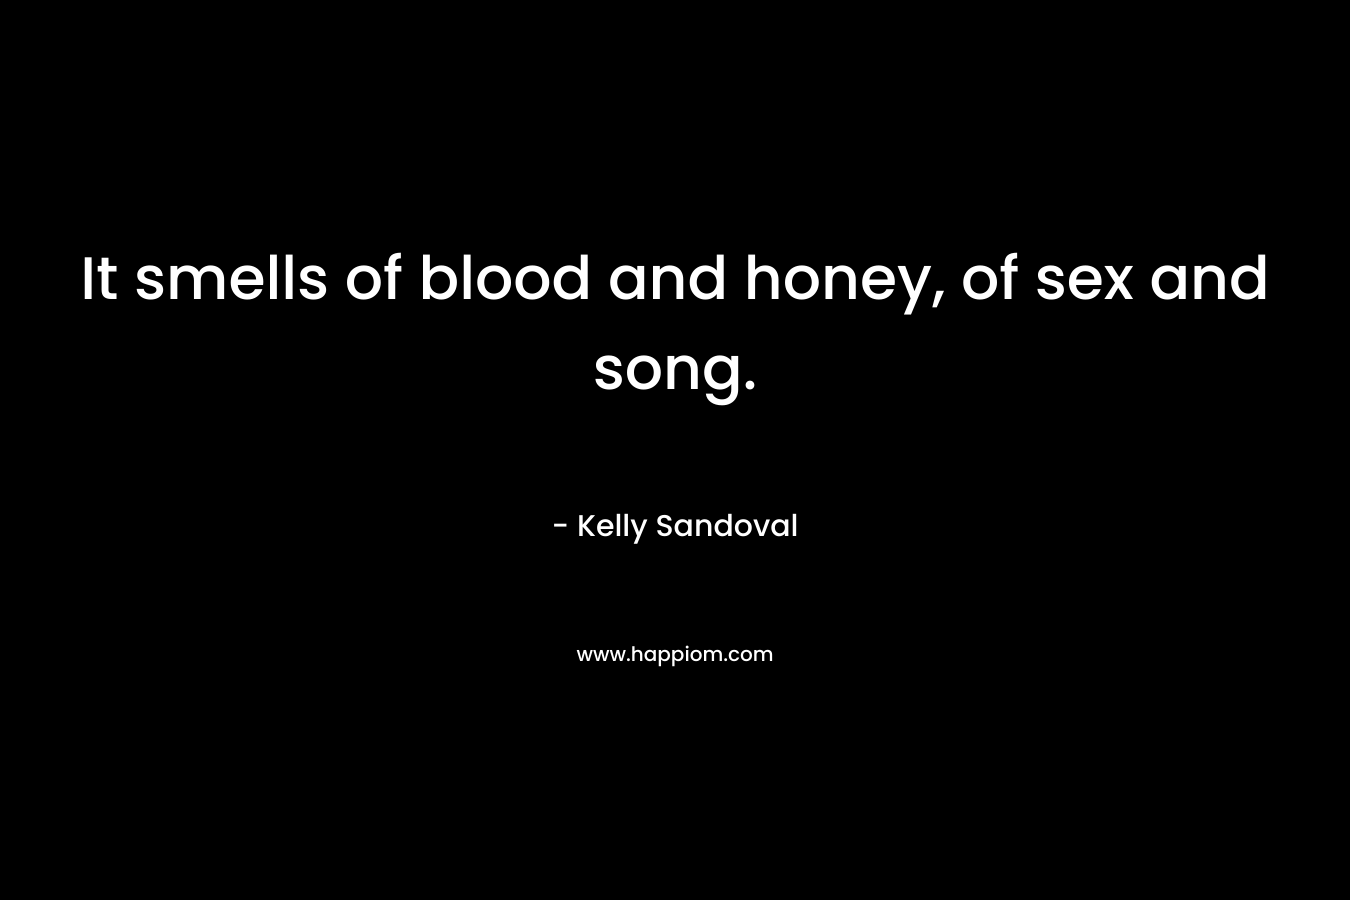 It smells of blood and honey, of sex and song.